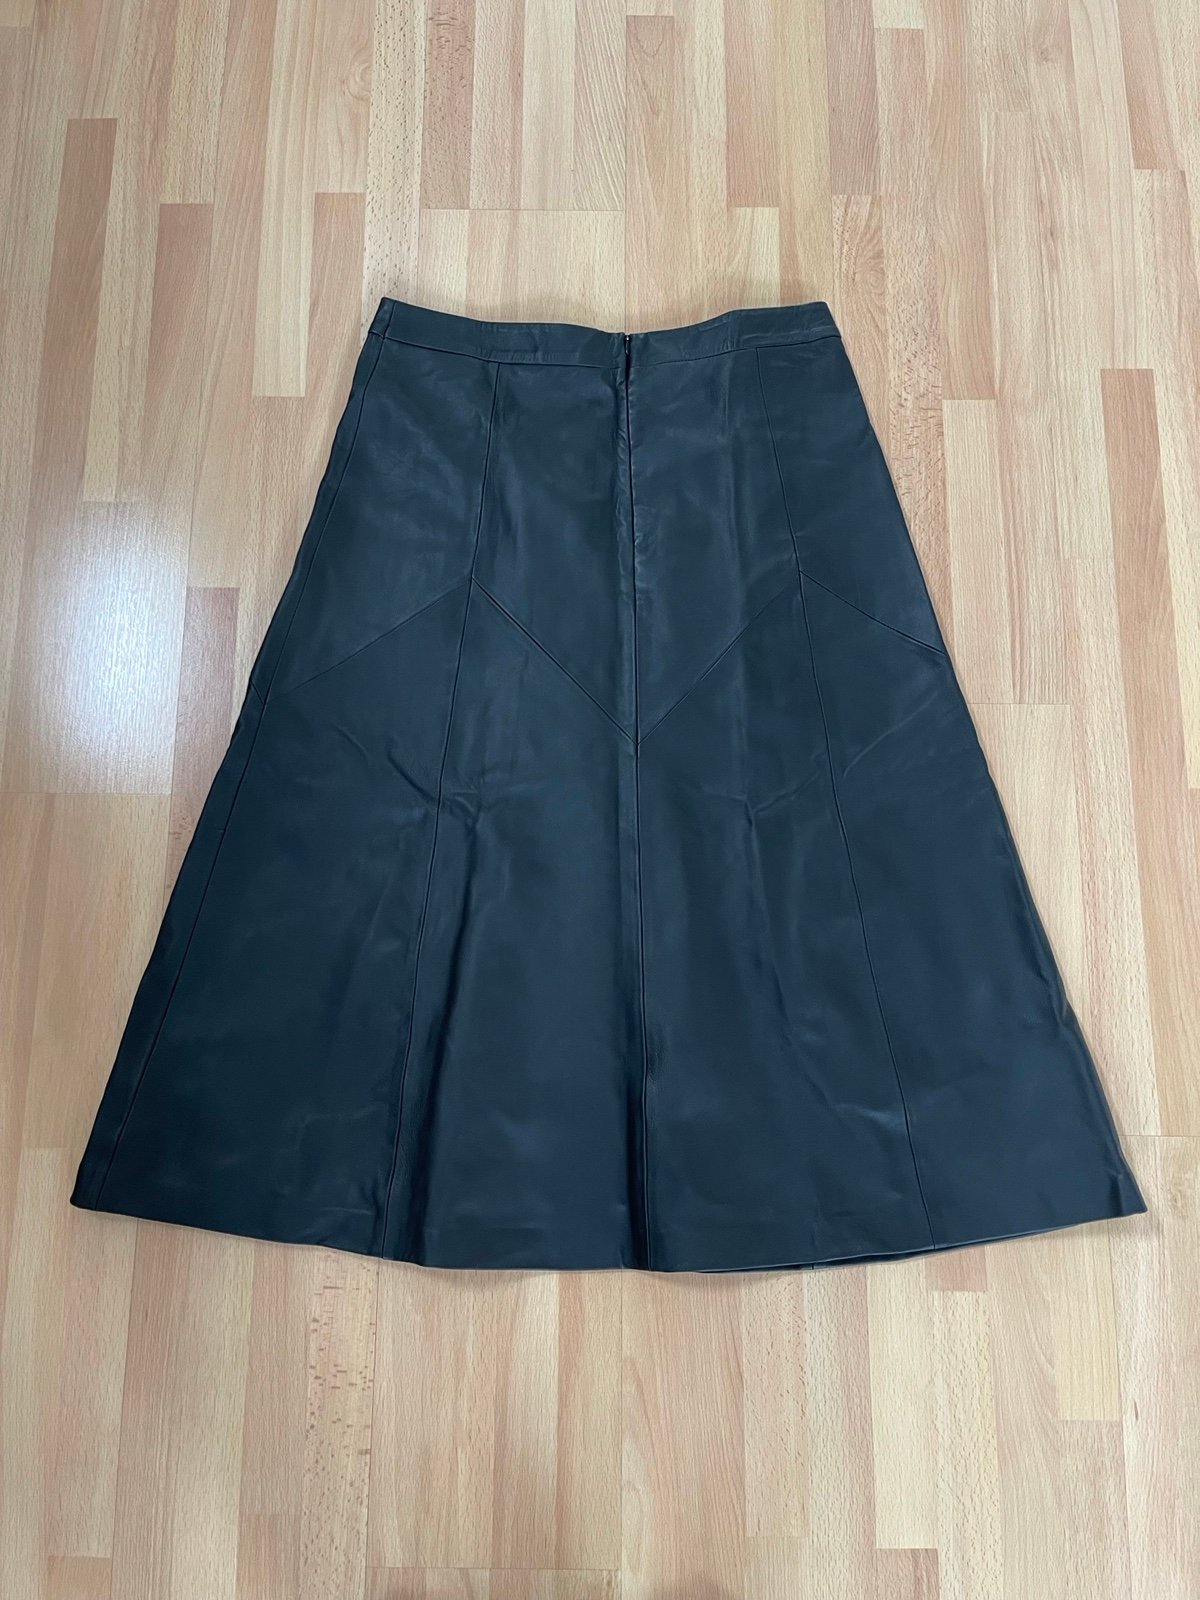 Popular LL Leather Lovers Black A-line MIDI Skirt nruwtAZIC Everyday Low Prices